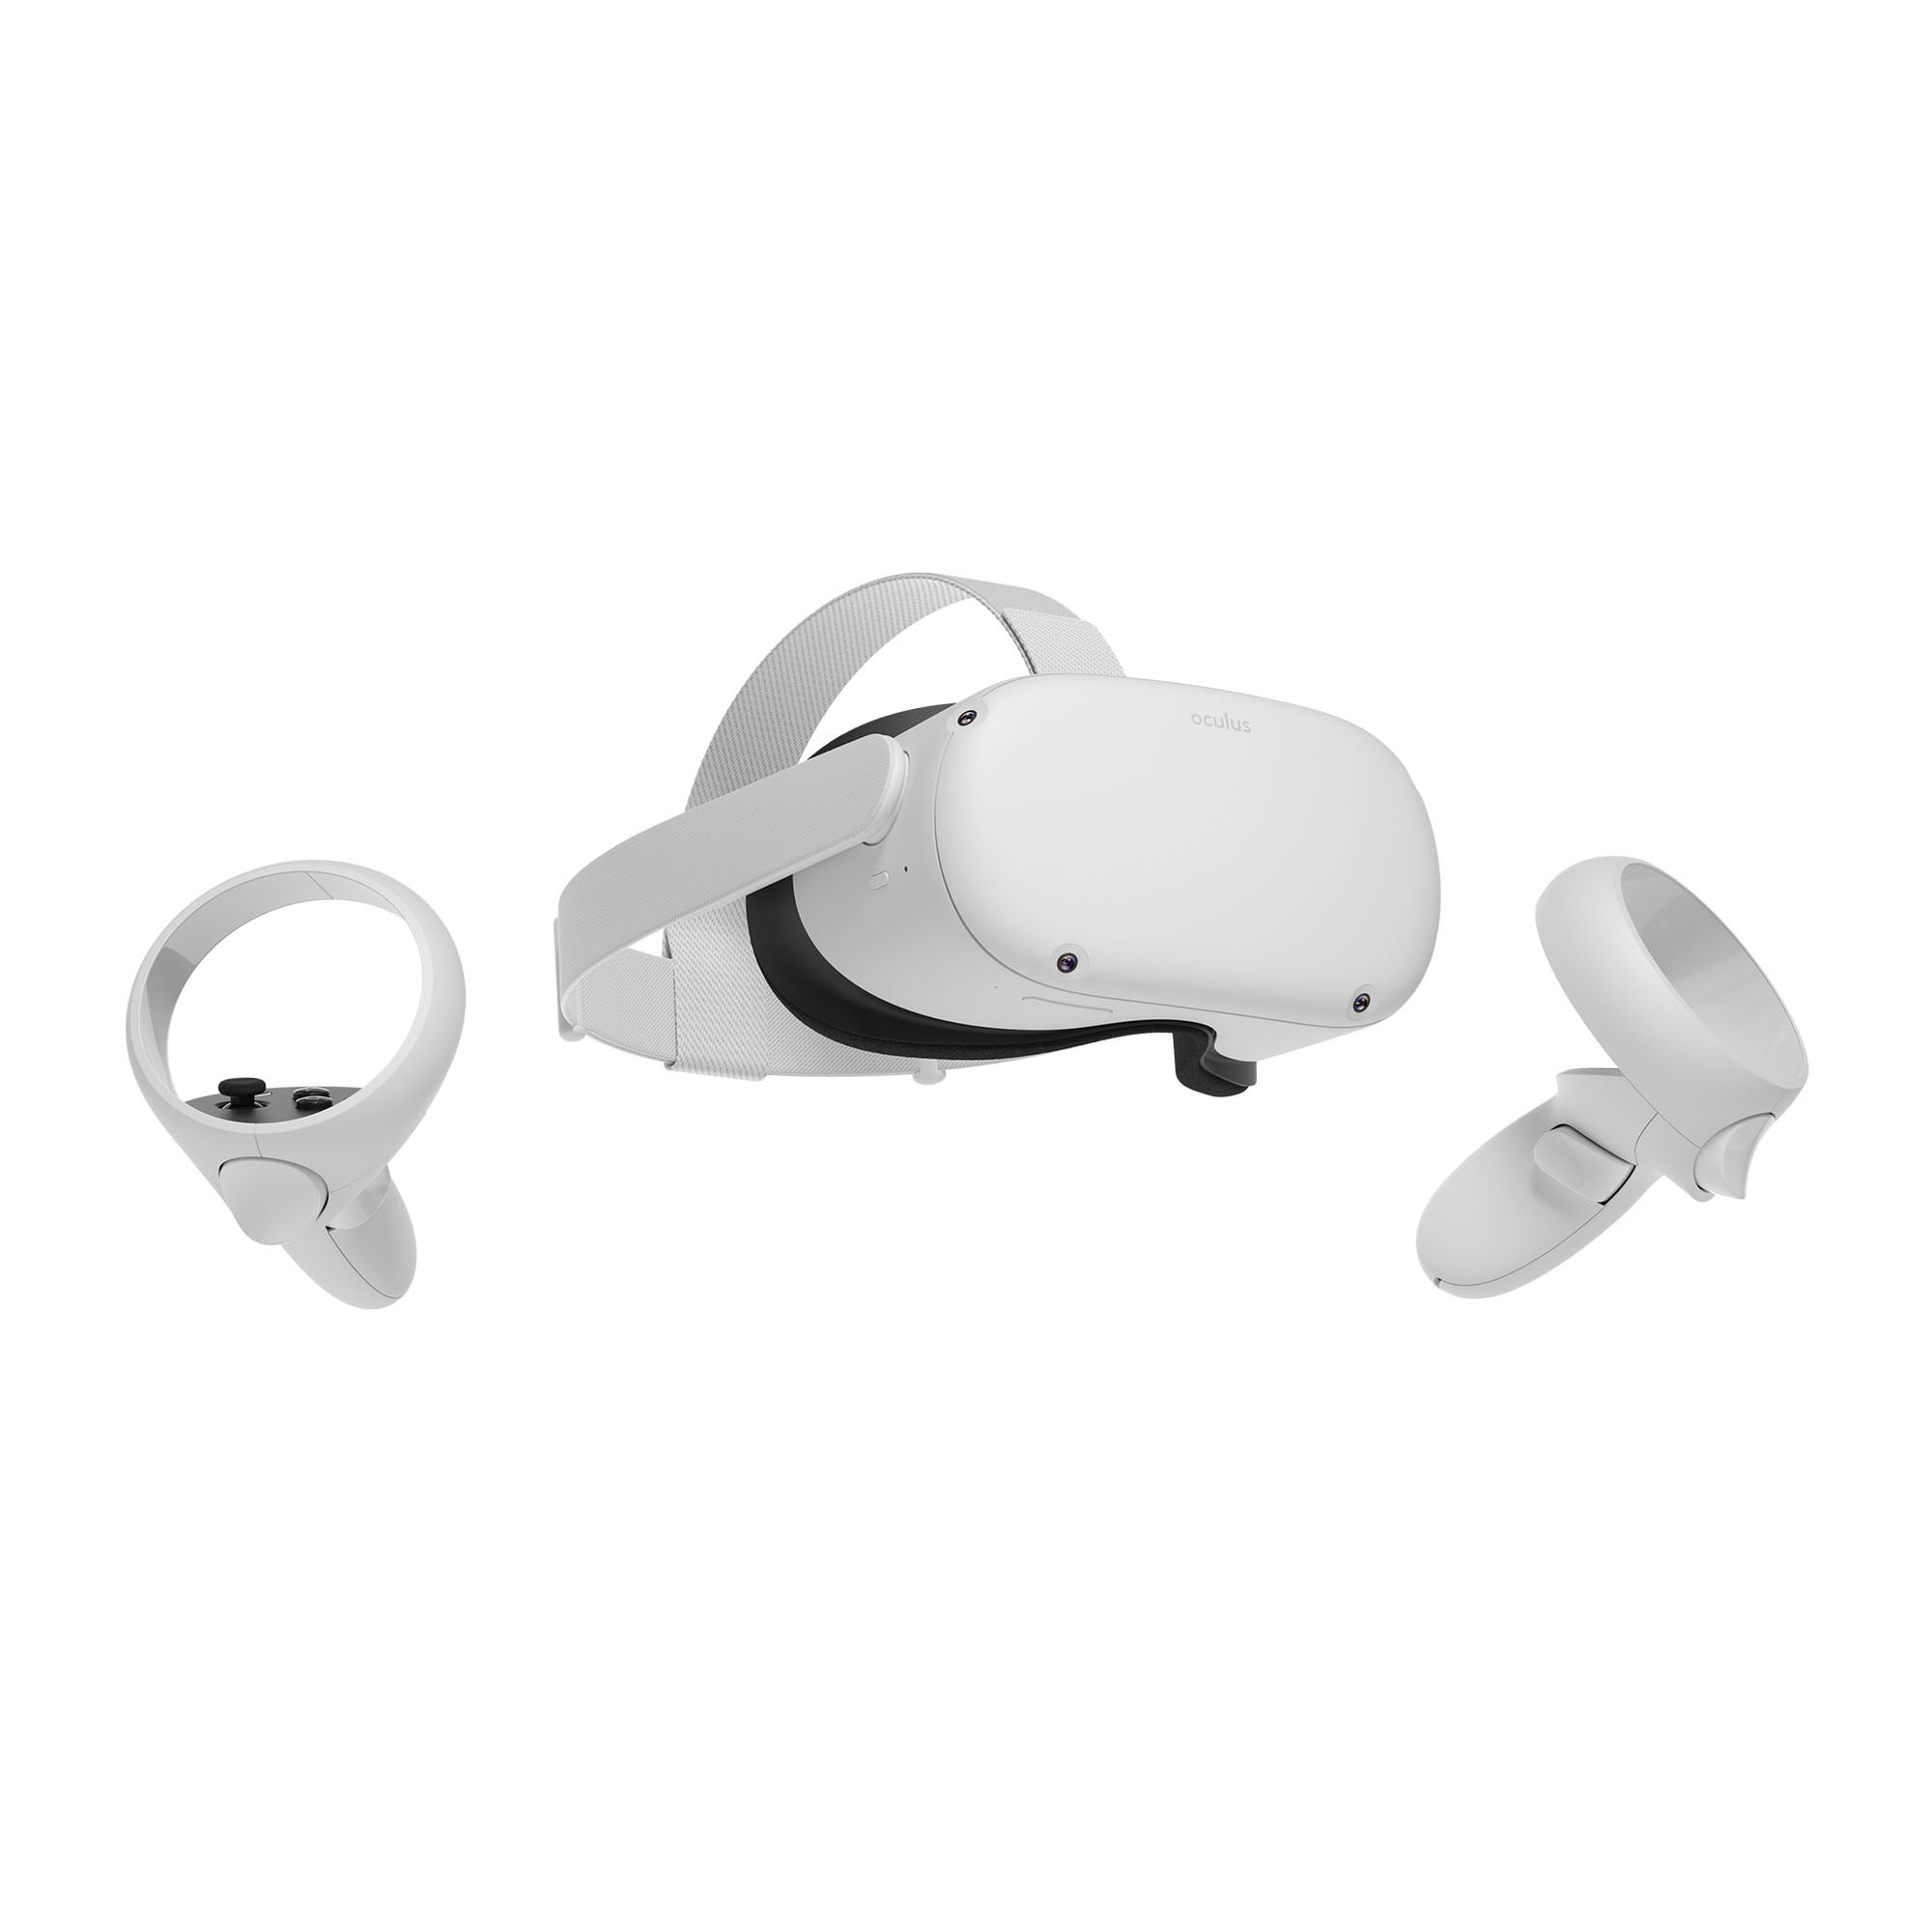 Meta Quest 2 (Oculus) - Advanced All-In-One Virtual Reality Headset - 128GB